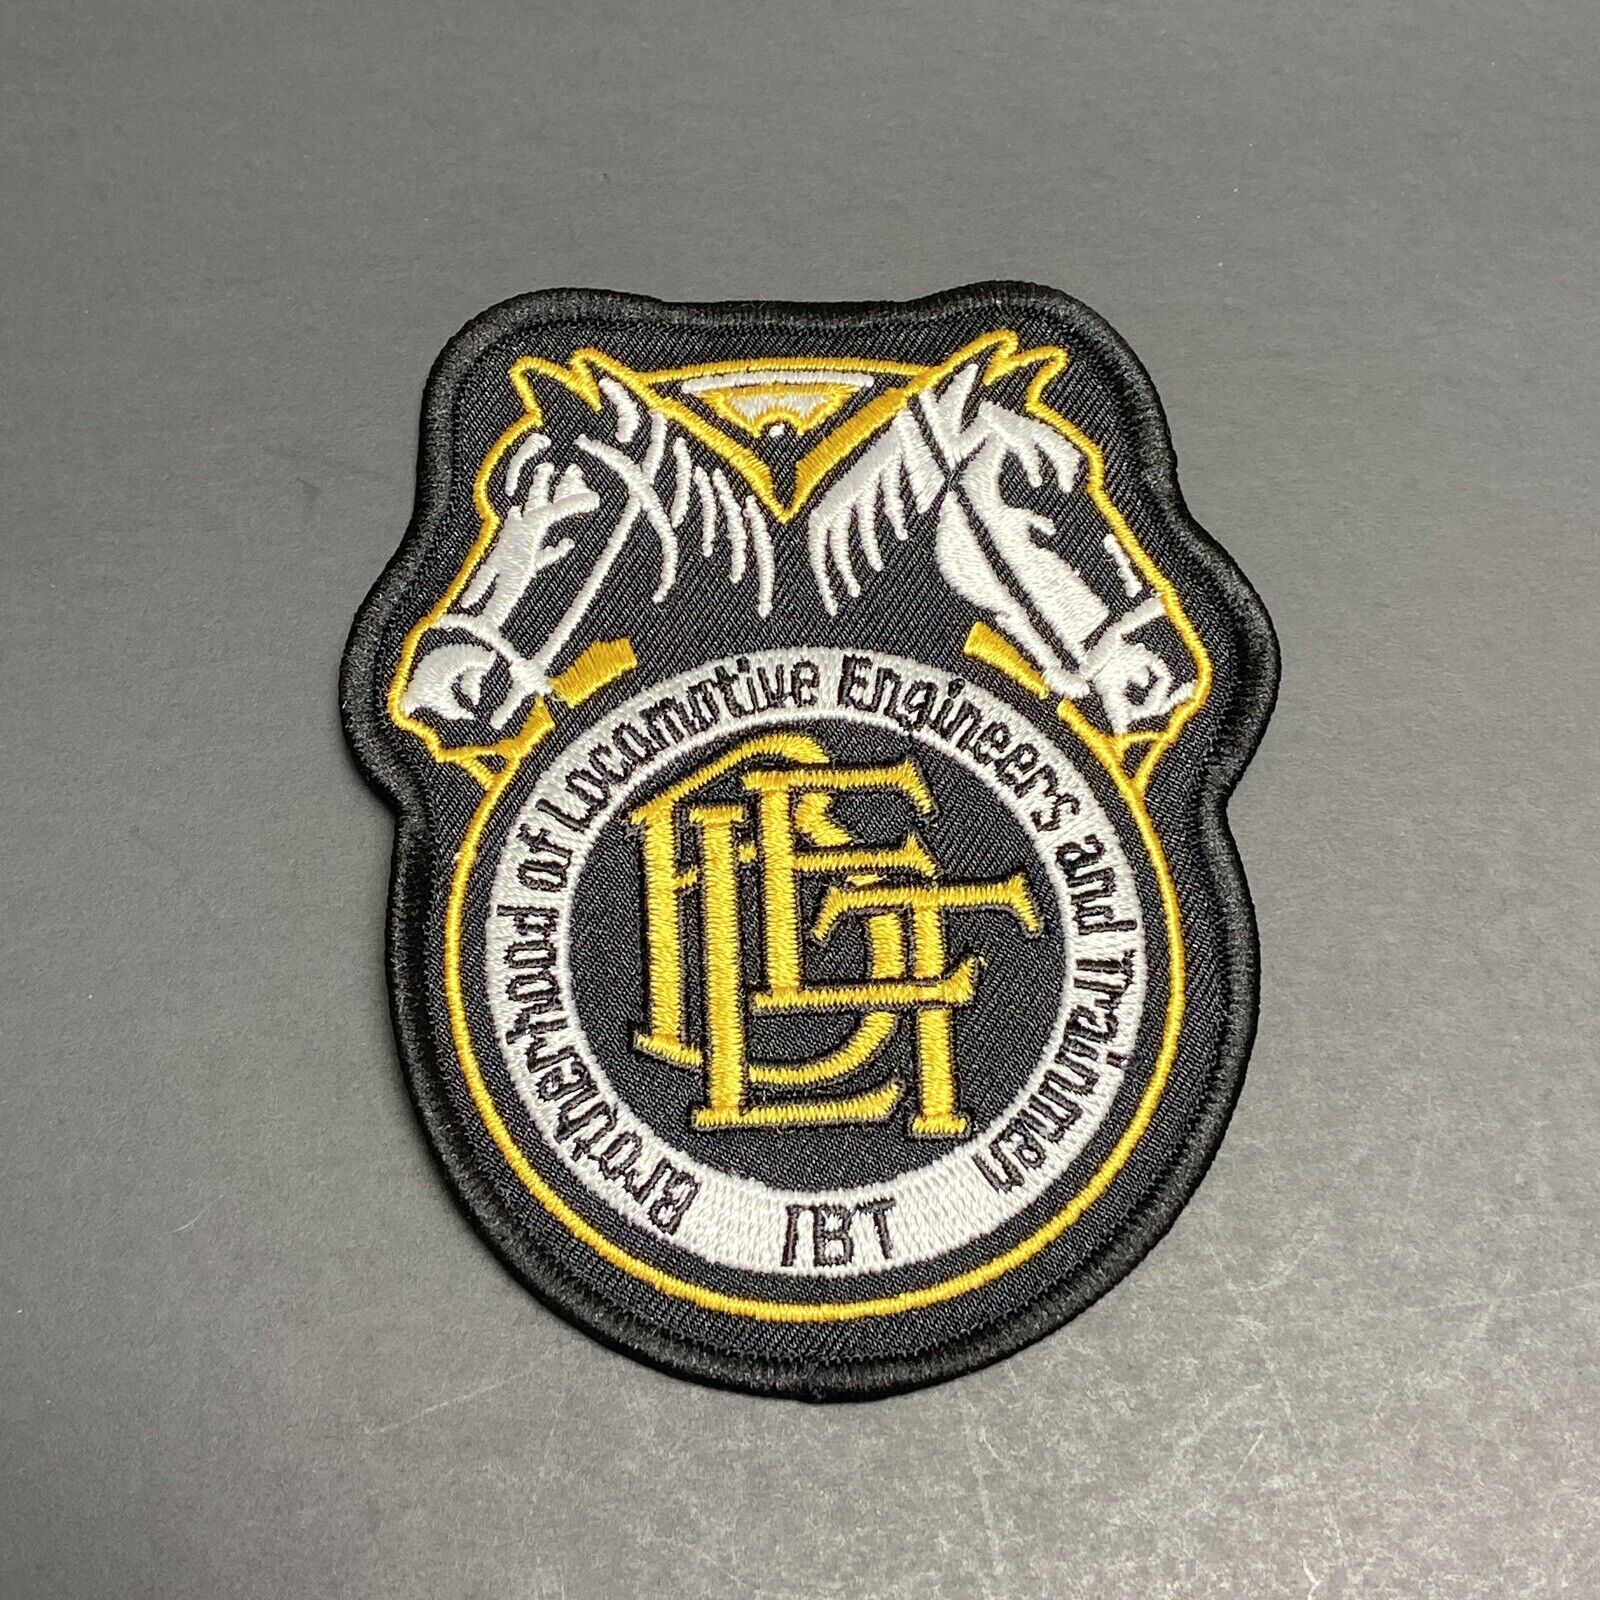 Brotherhood of Locomotive Engineers and Trainmen Teamsters Patch Trains Blet